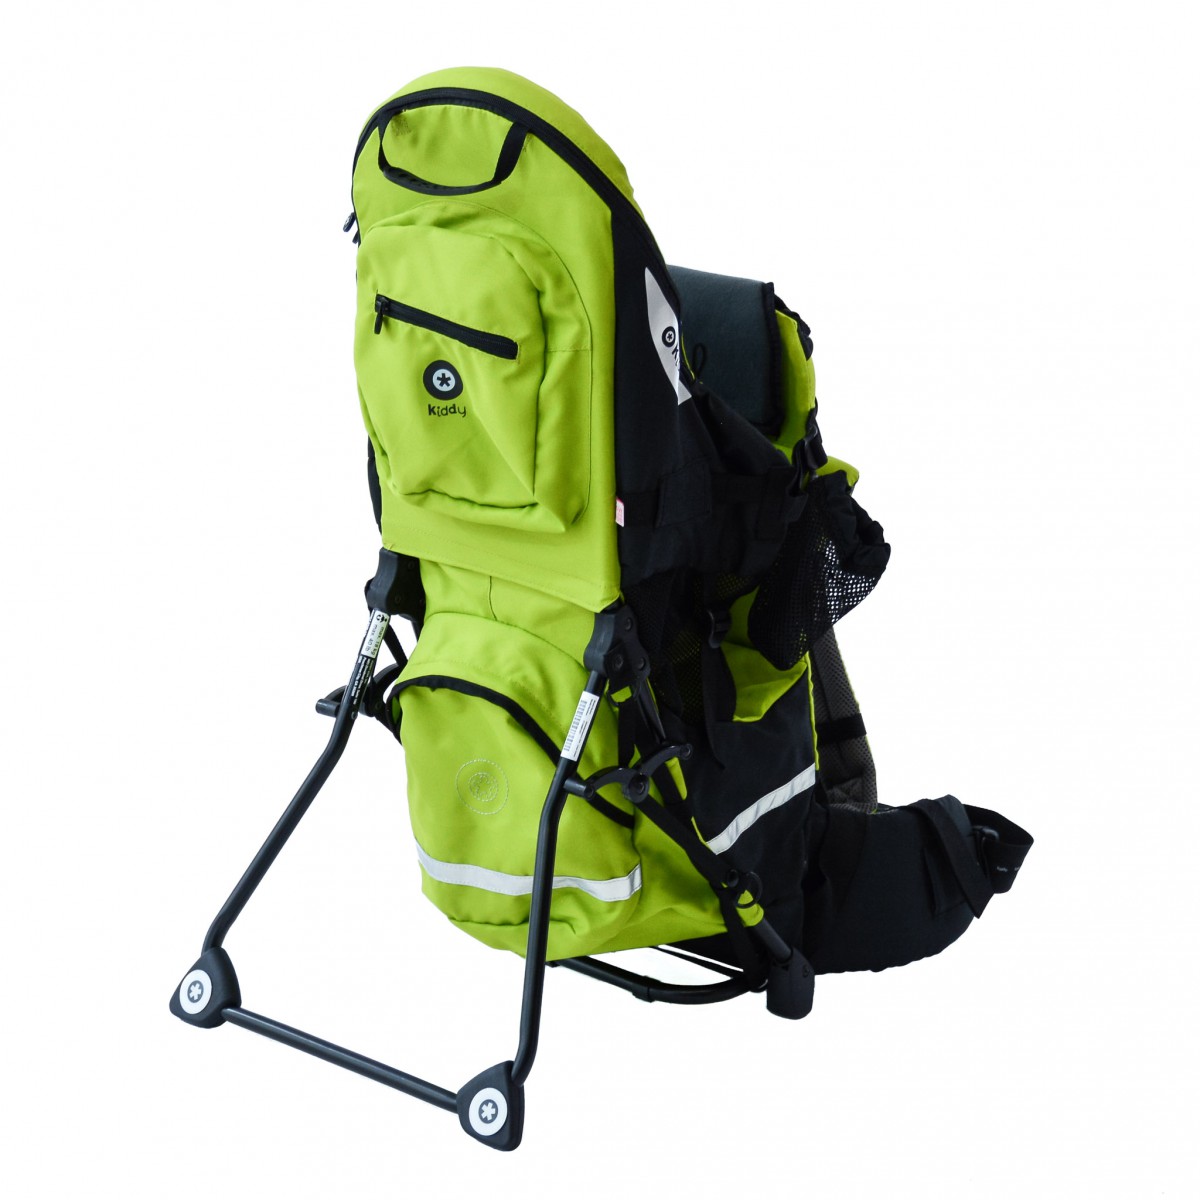 Kiddy Adventure Pack Review